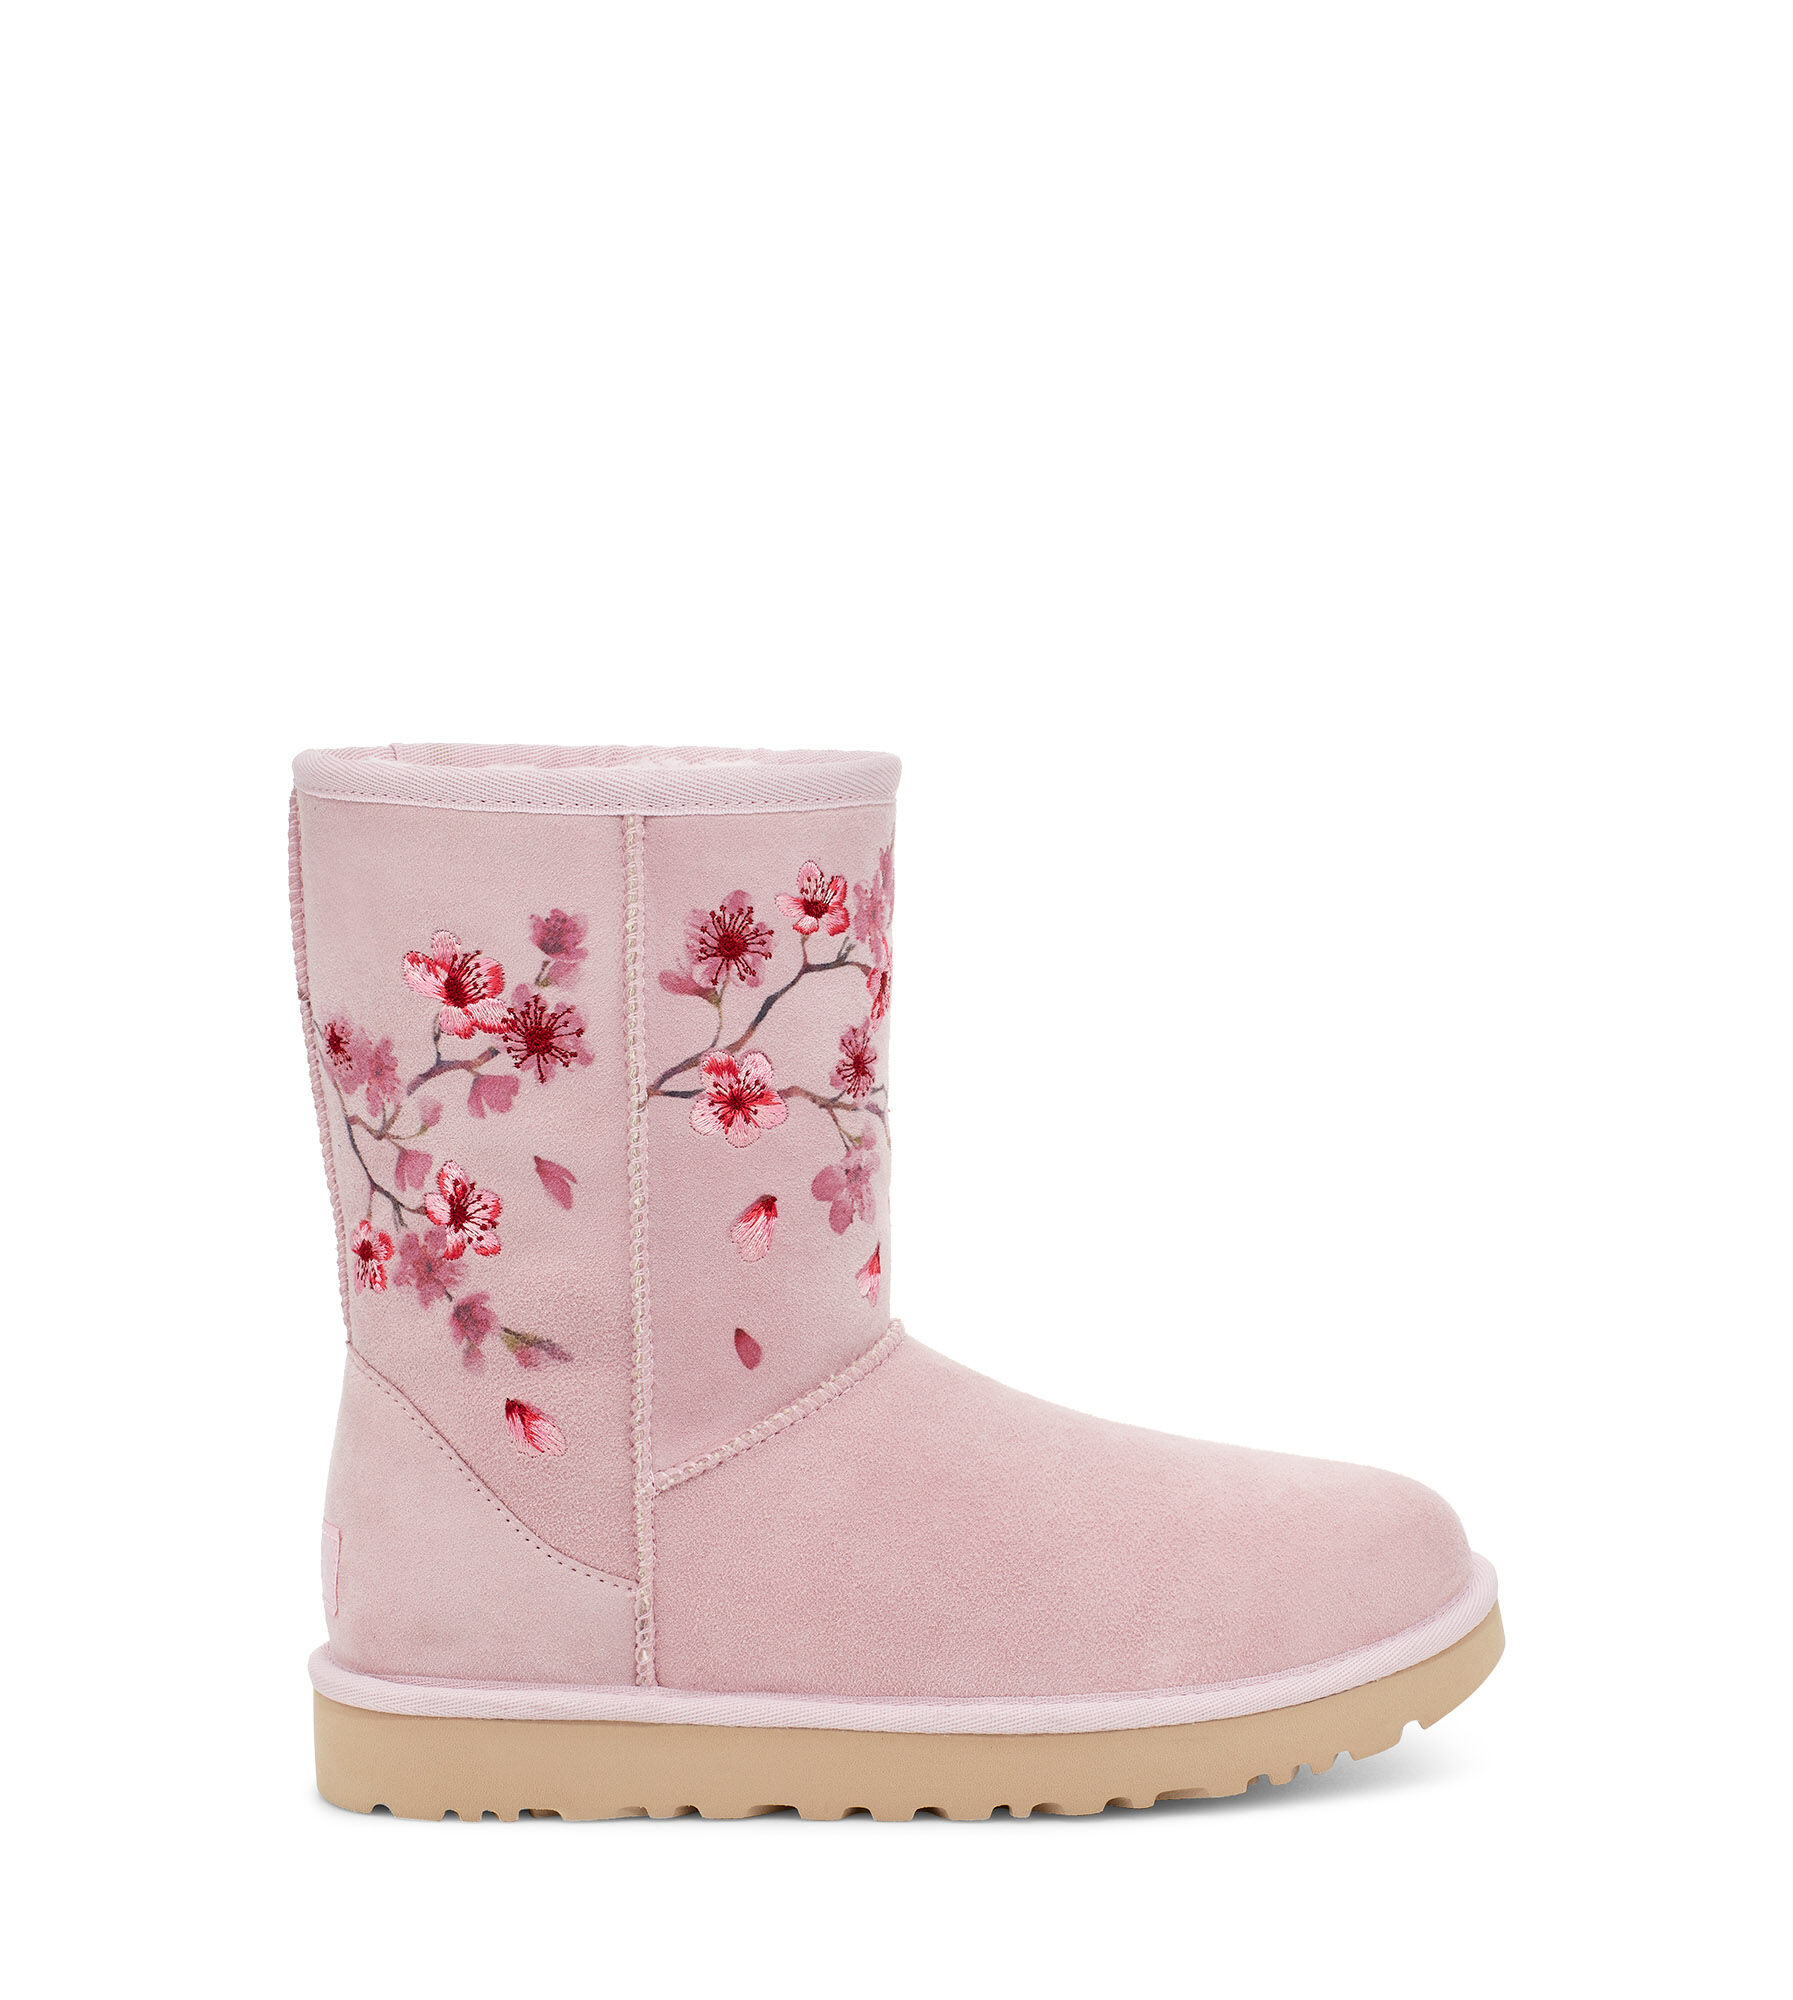 new uggs pink